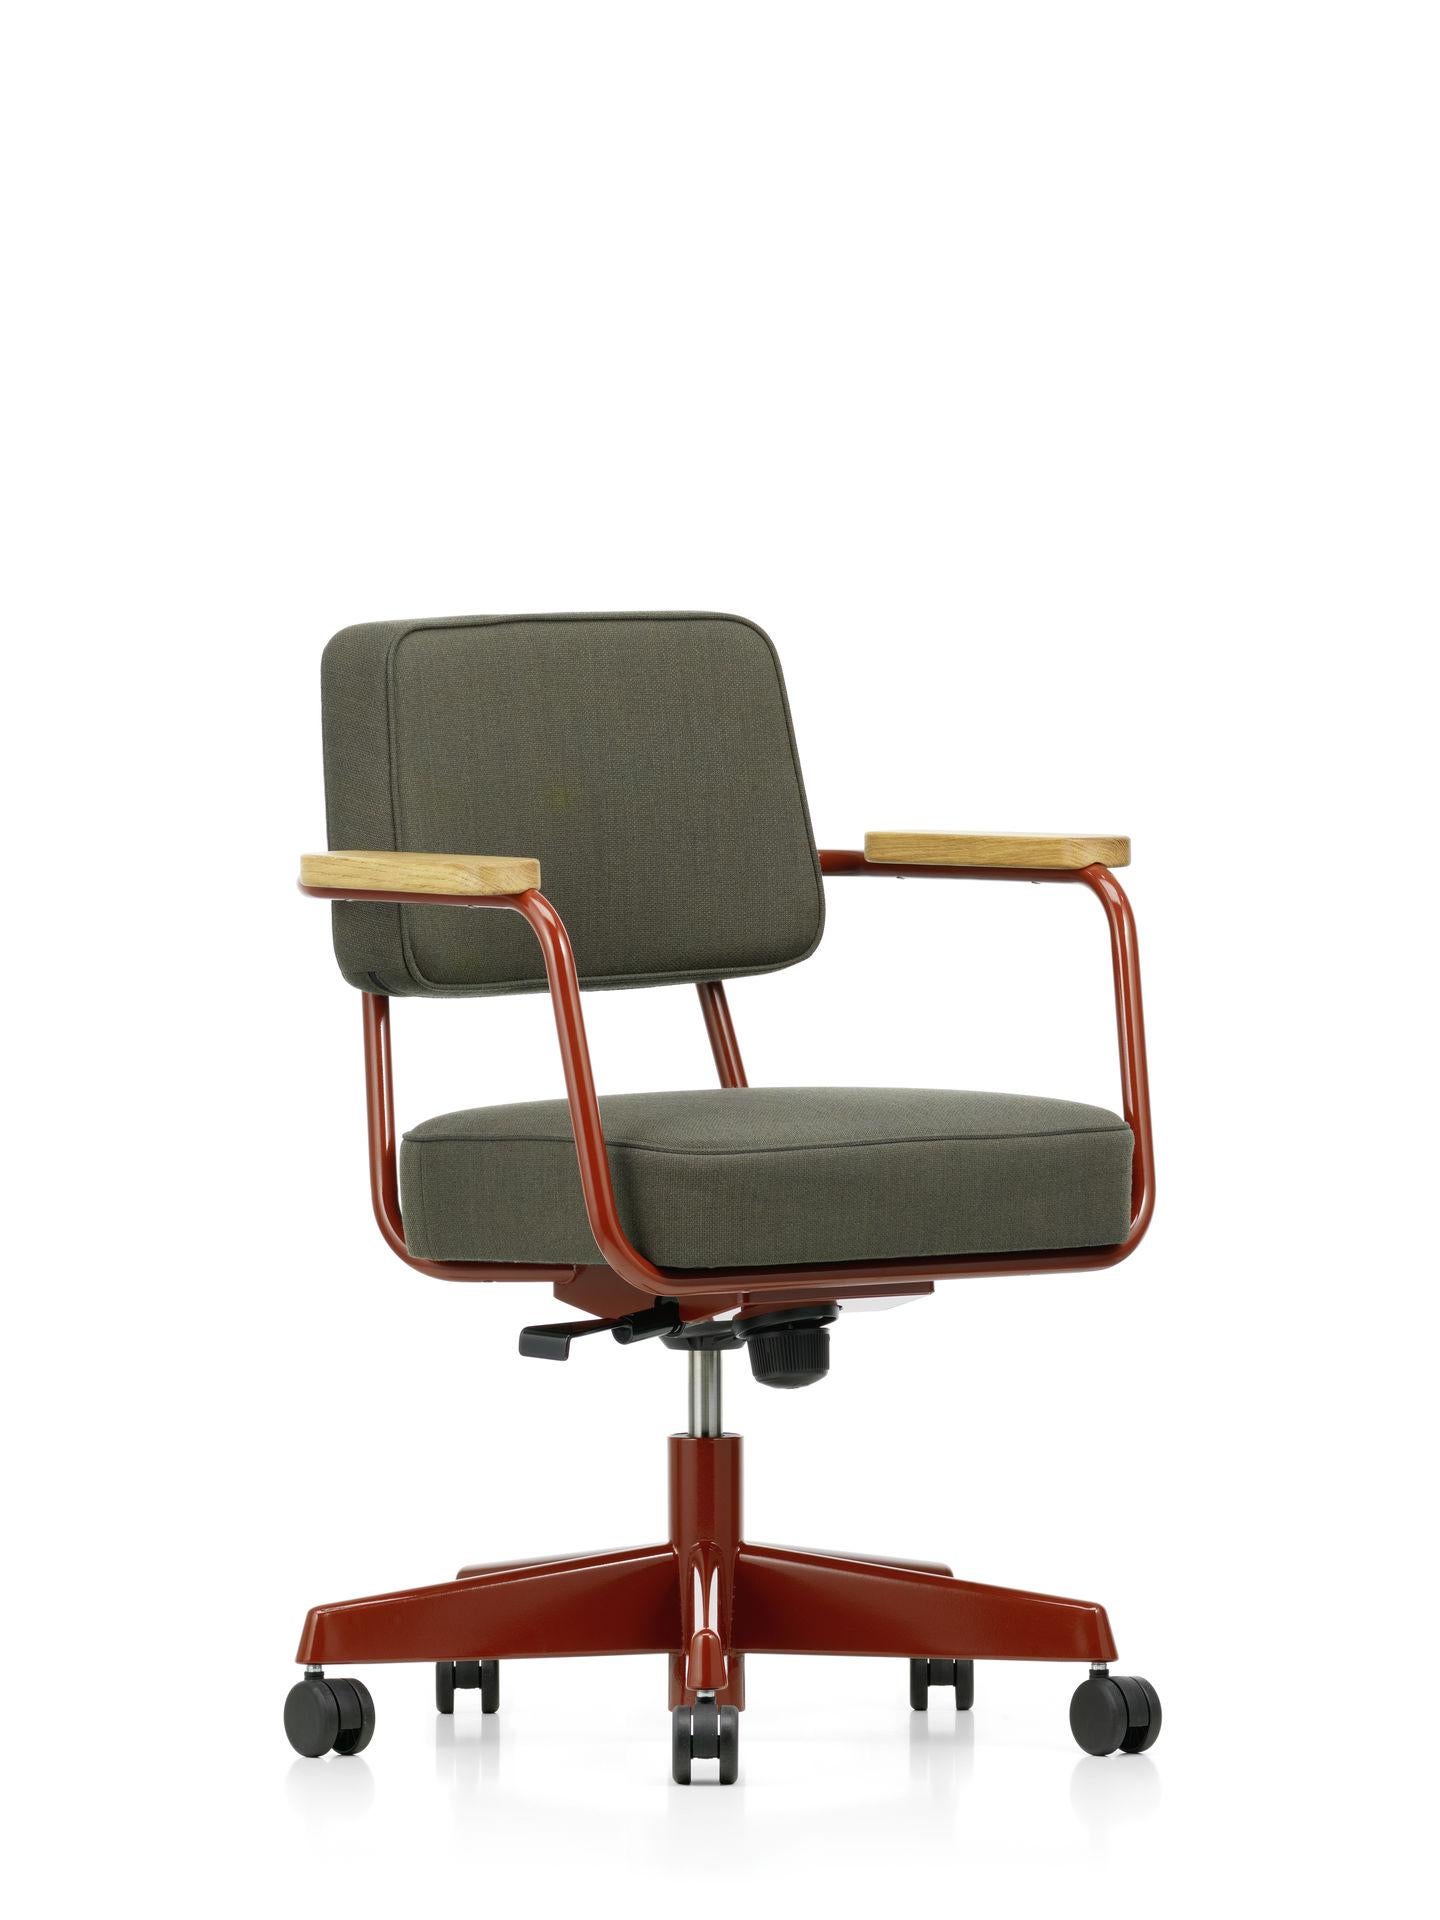 Chair designed by Jean Prouvé in 1951.
Manufactured by Vitra, Switzerland.

The swivel seat of Fauteuil Direction Pivotant is height adjustable, and the backward tilt mechanism can be adapted to the individual user's weight. These features are